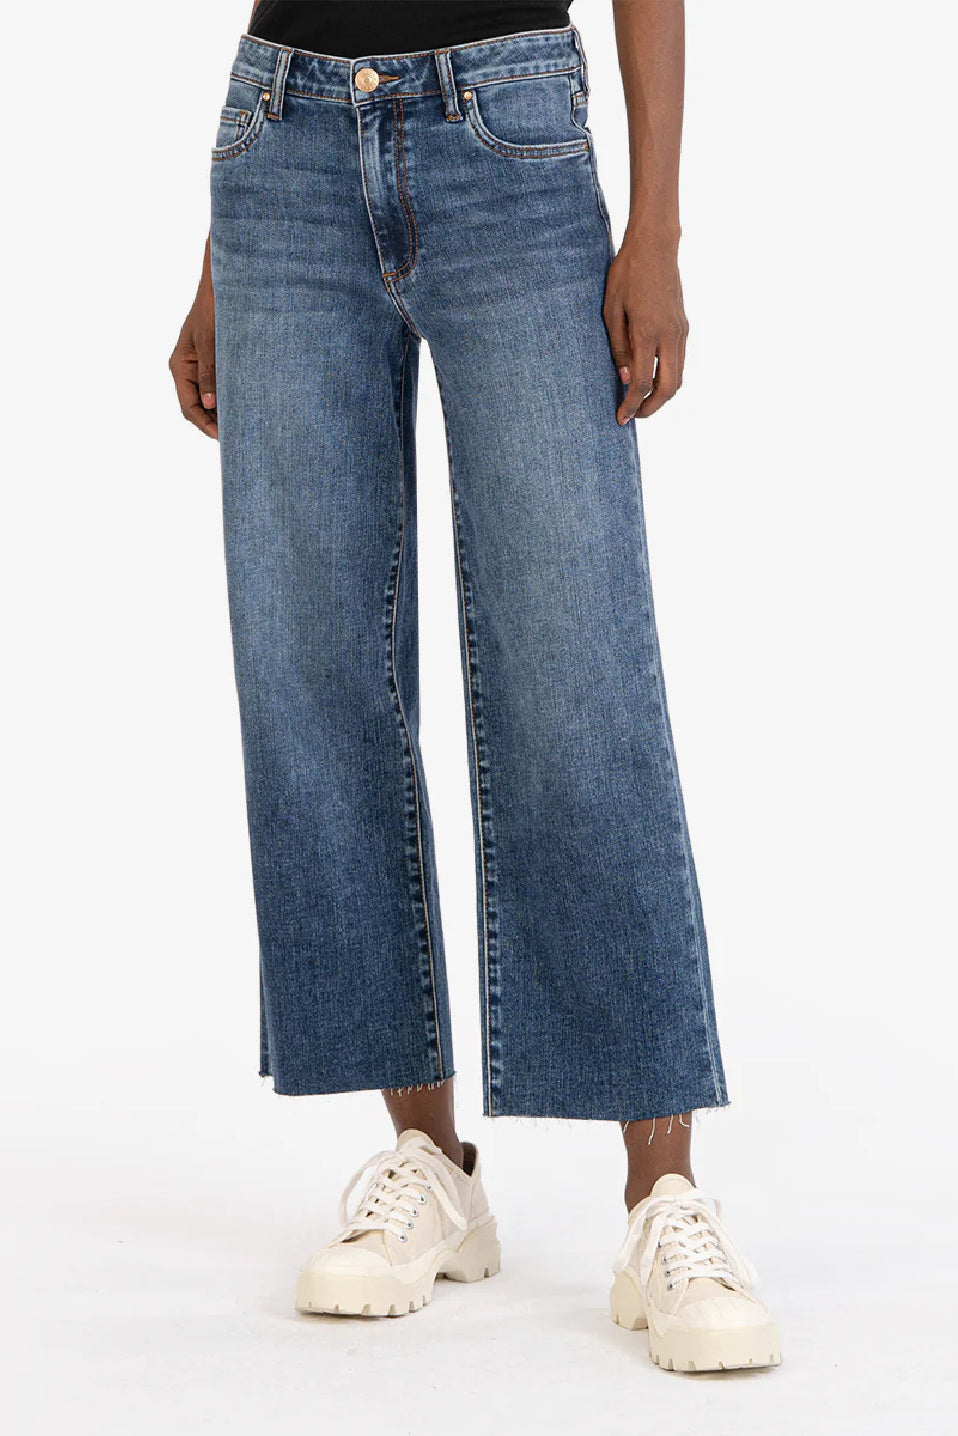 Kut From The Kloth Charlotte Wide Leg Crop Jeans (Commendatory Wash)